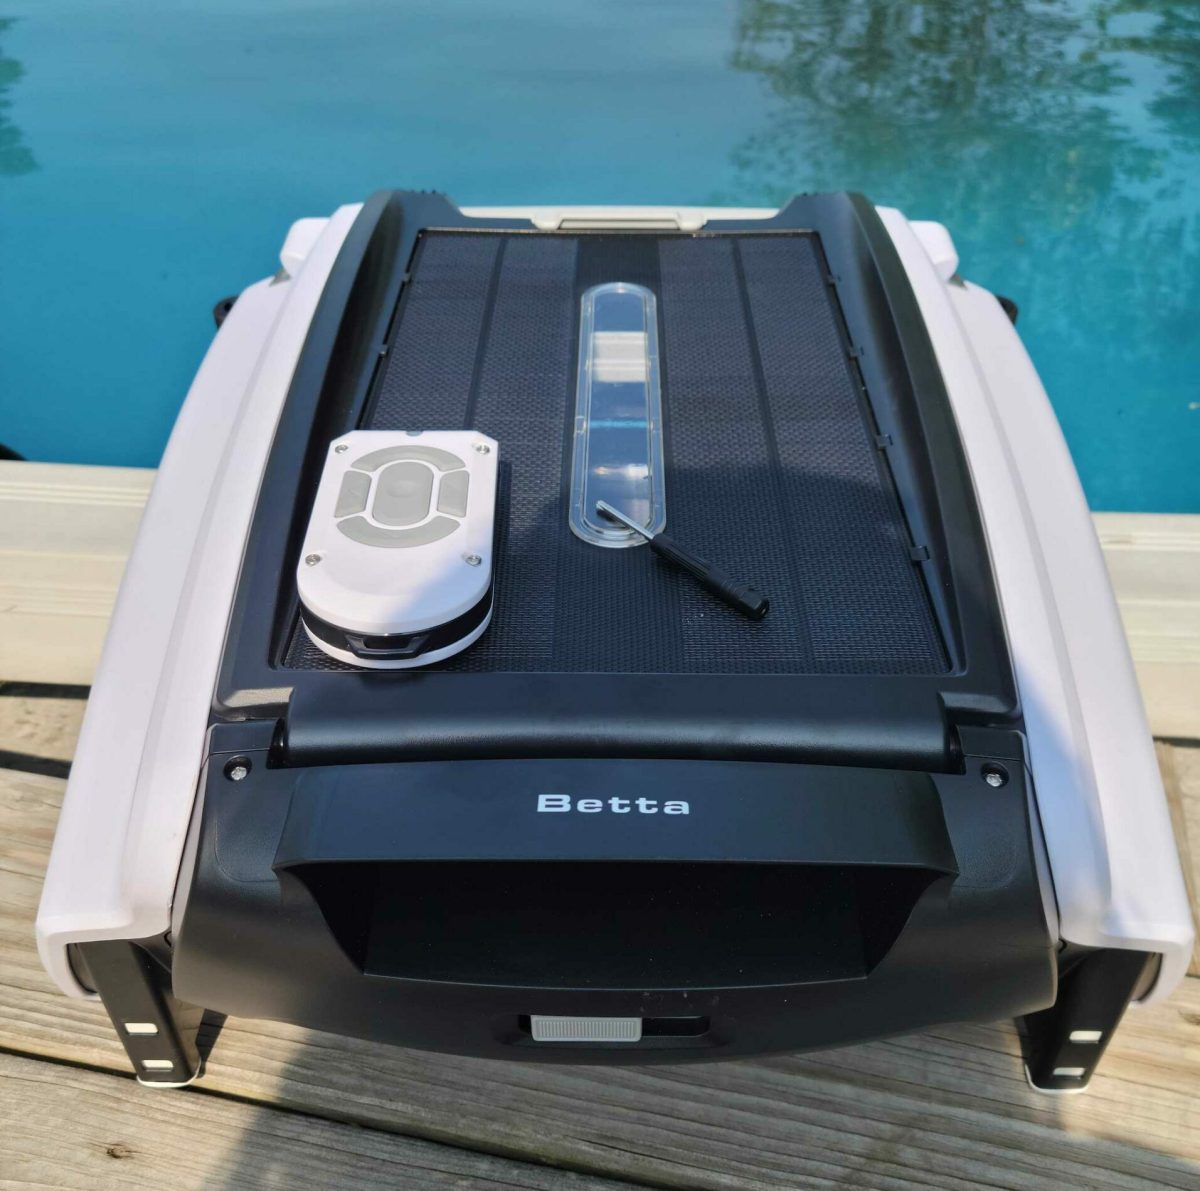 BettaBot robotic pool skimmer on deck next to pool